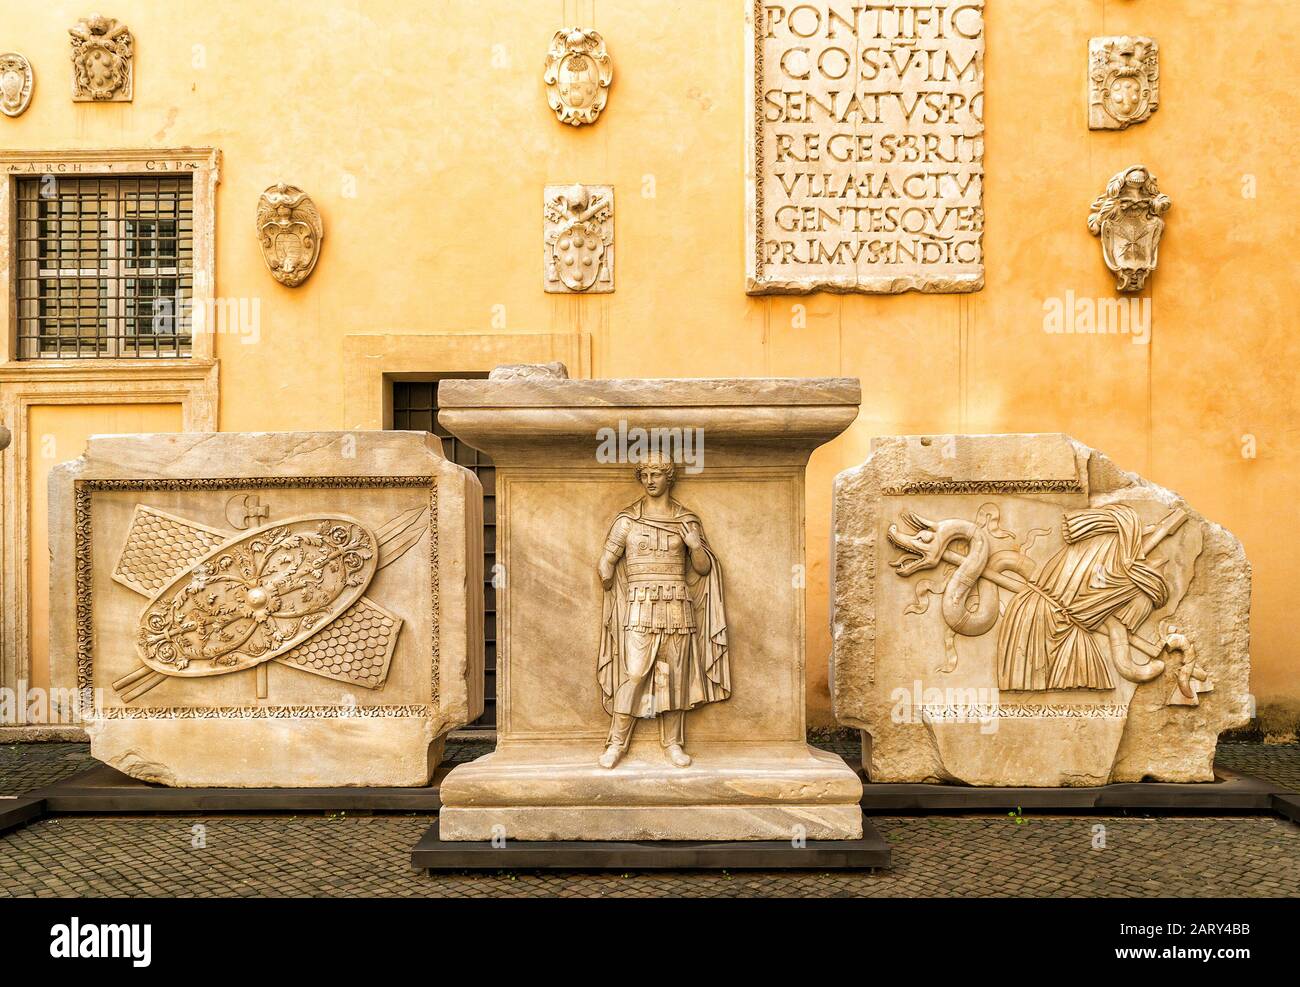 ROME, ITALY - OCTOBER 3, 2012: Antique works of art in the Capitoline Museum. Capitoline Hill - one of the hills of ancient Rome, where in ancient tim Stock Photo